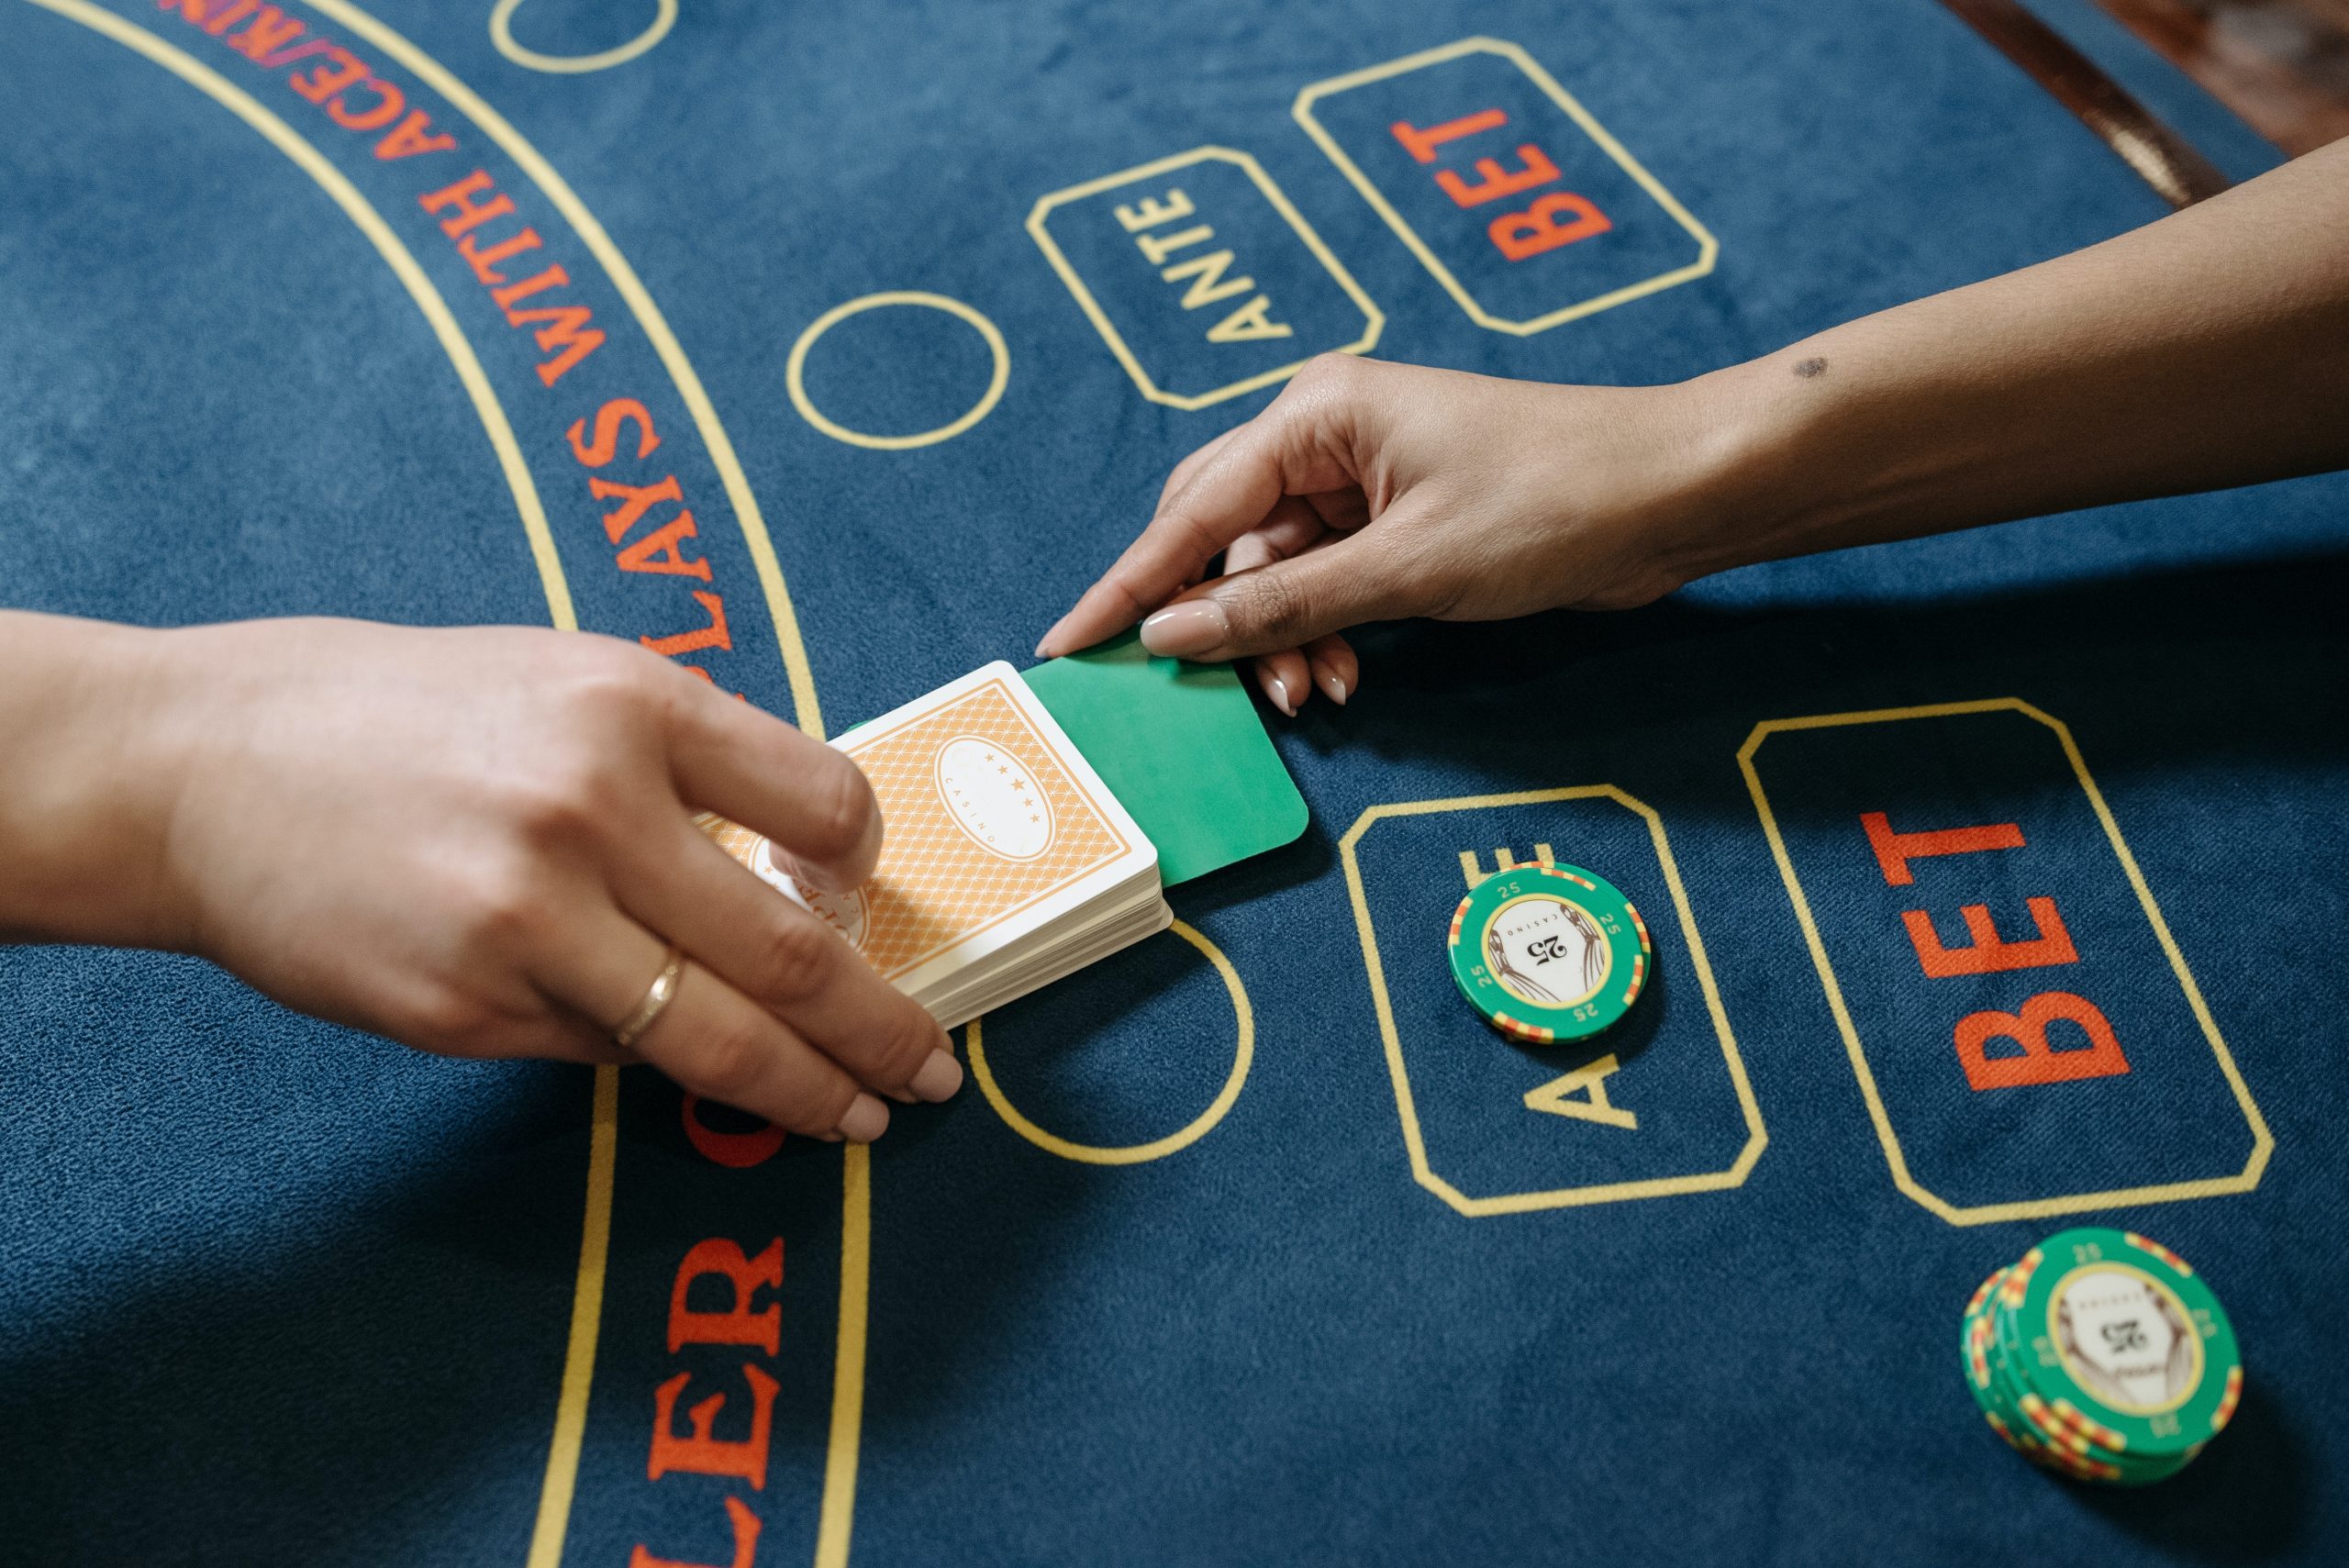 Traditional Casinos Could Do More With Their Marketing. Here’s How: